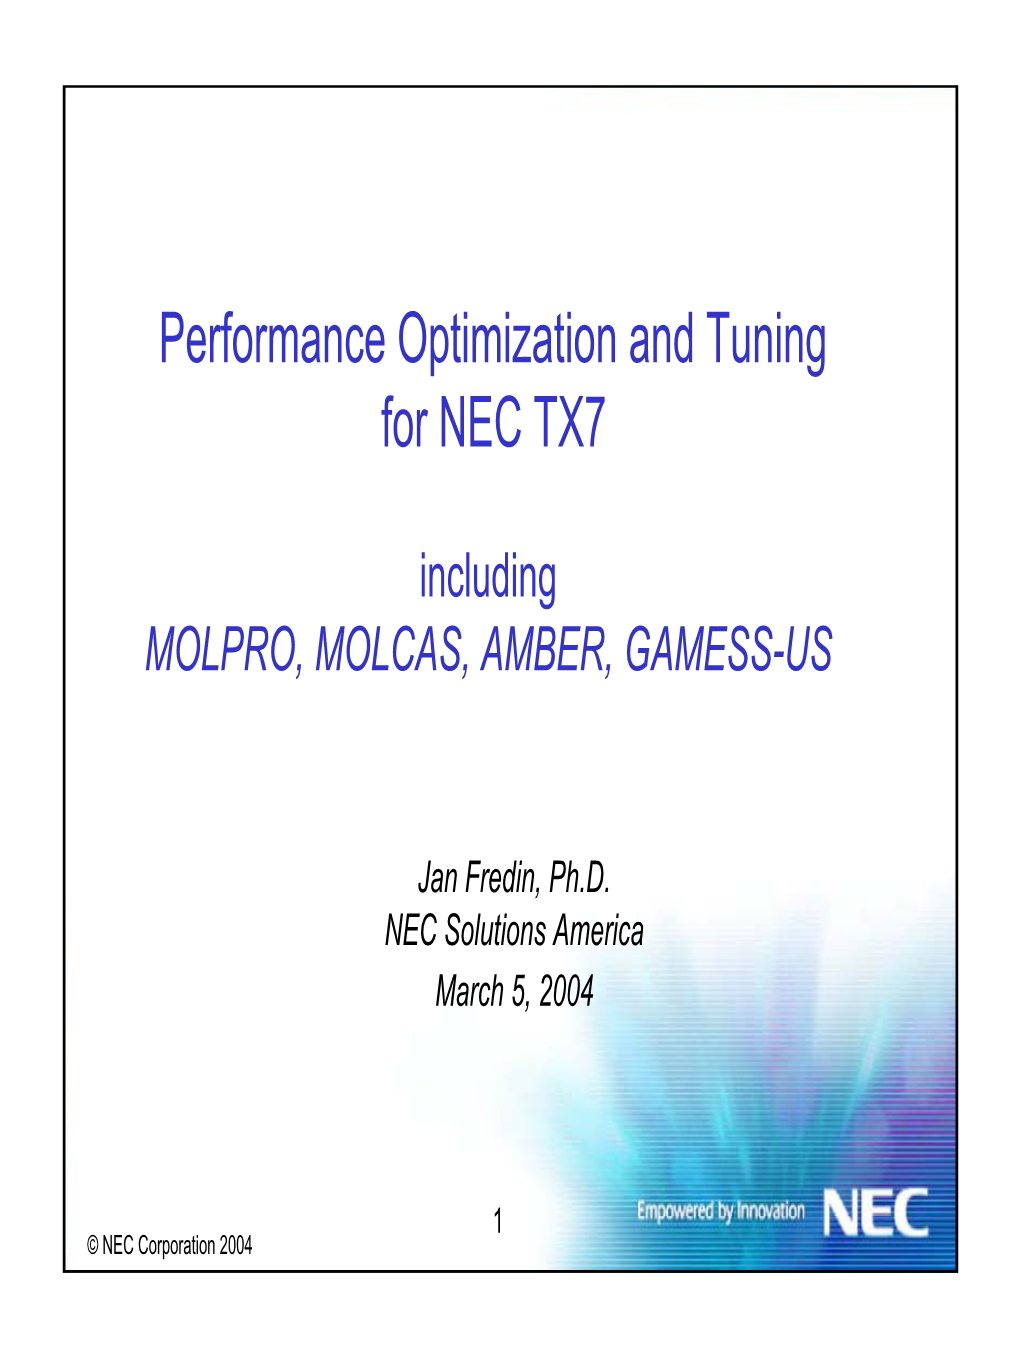 Performance Optimization and Tuning for NEC TX7